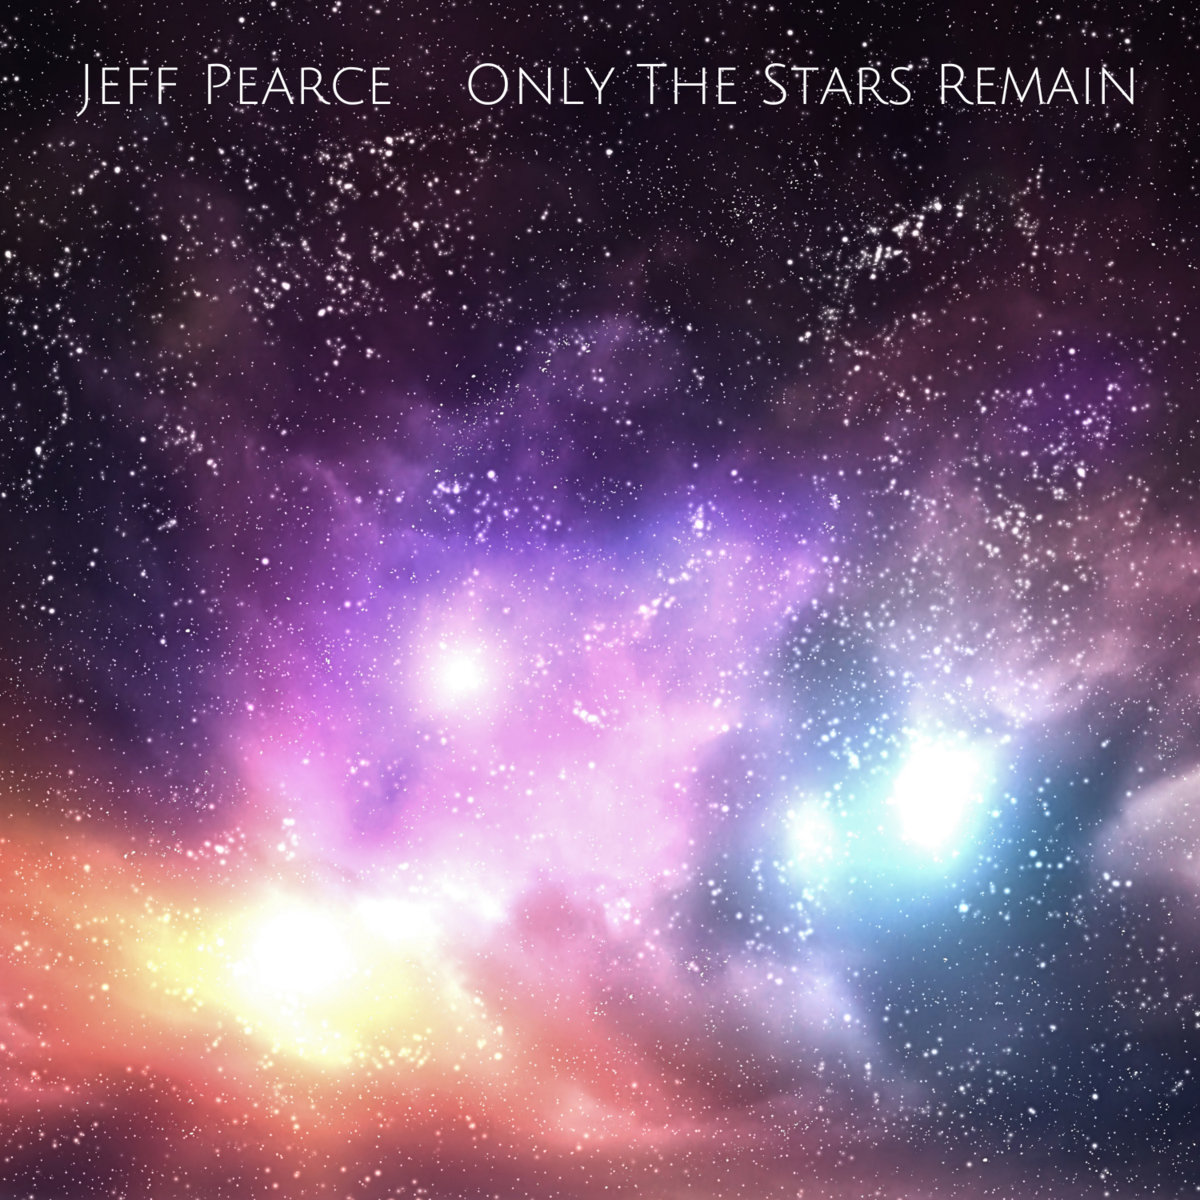 Cover of Only the Stars Remain by Jeff Pearce